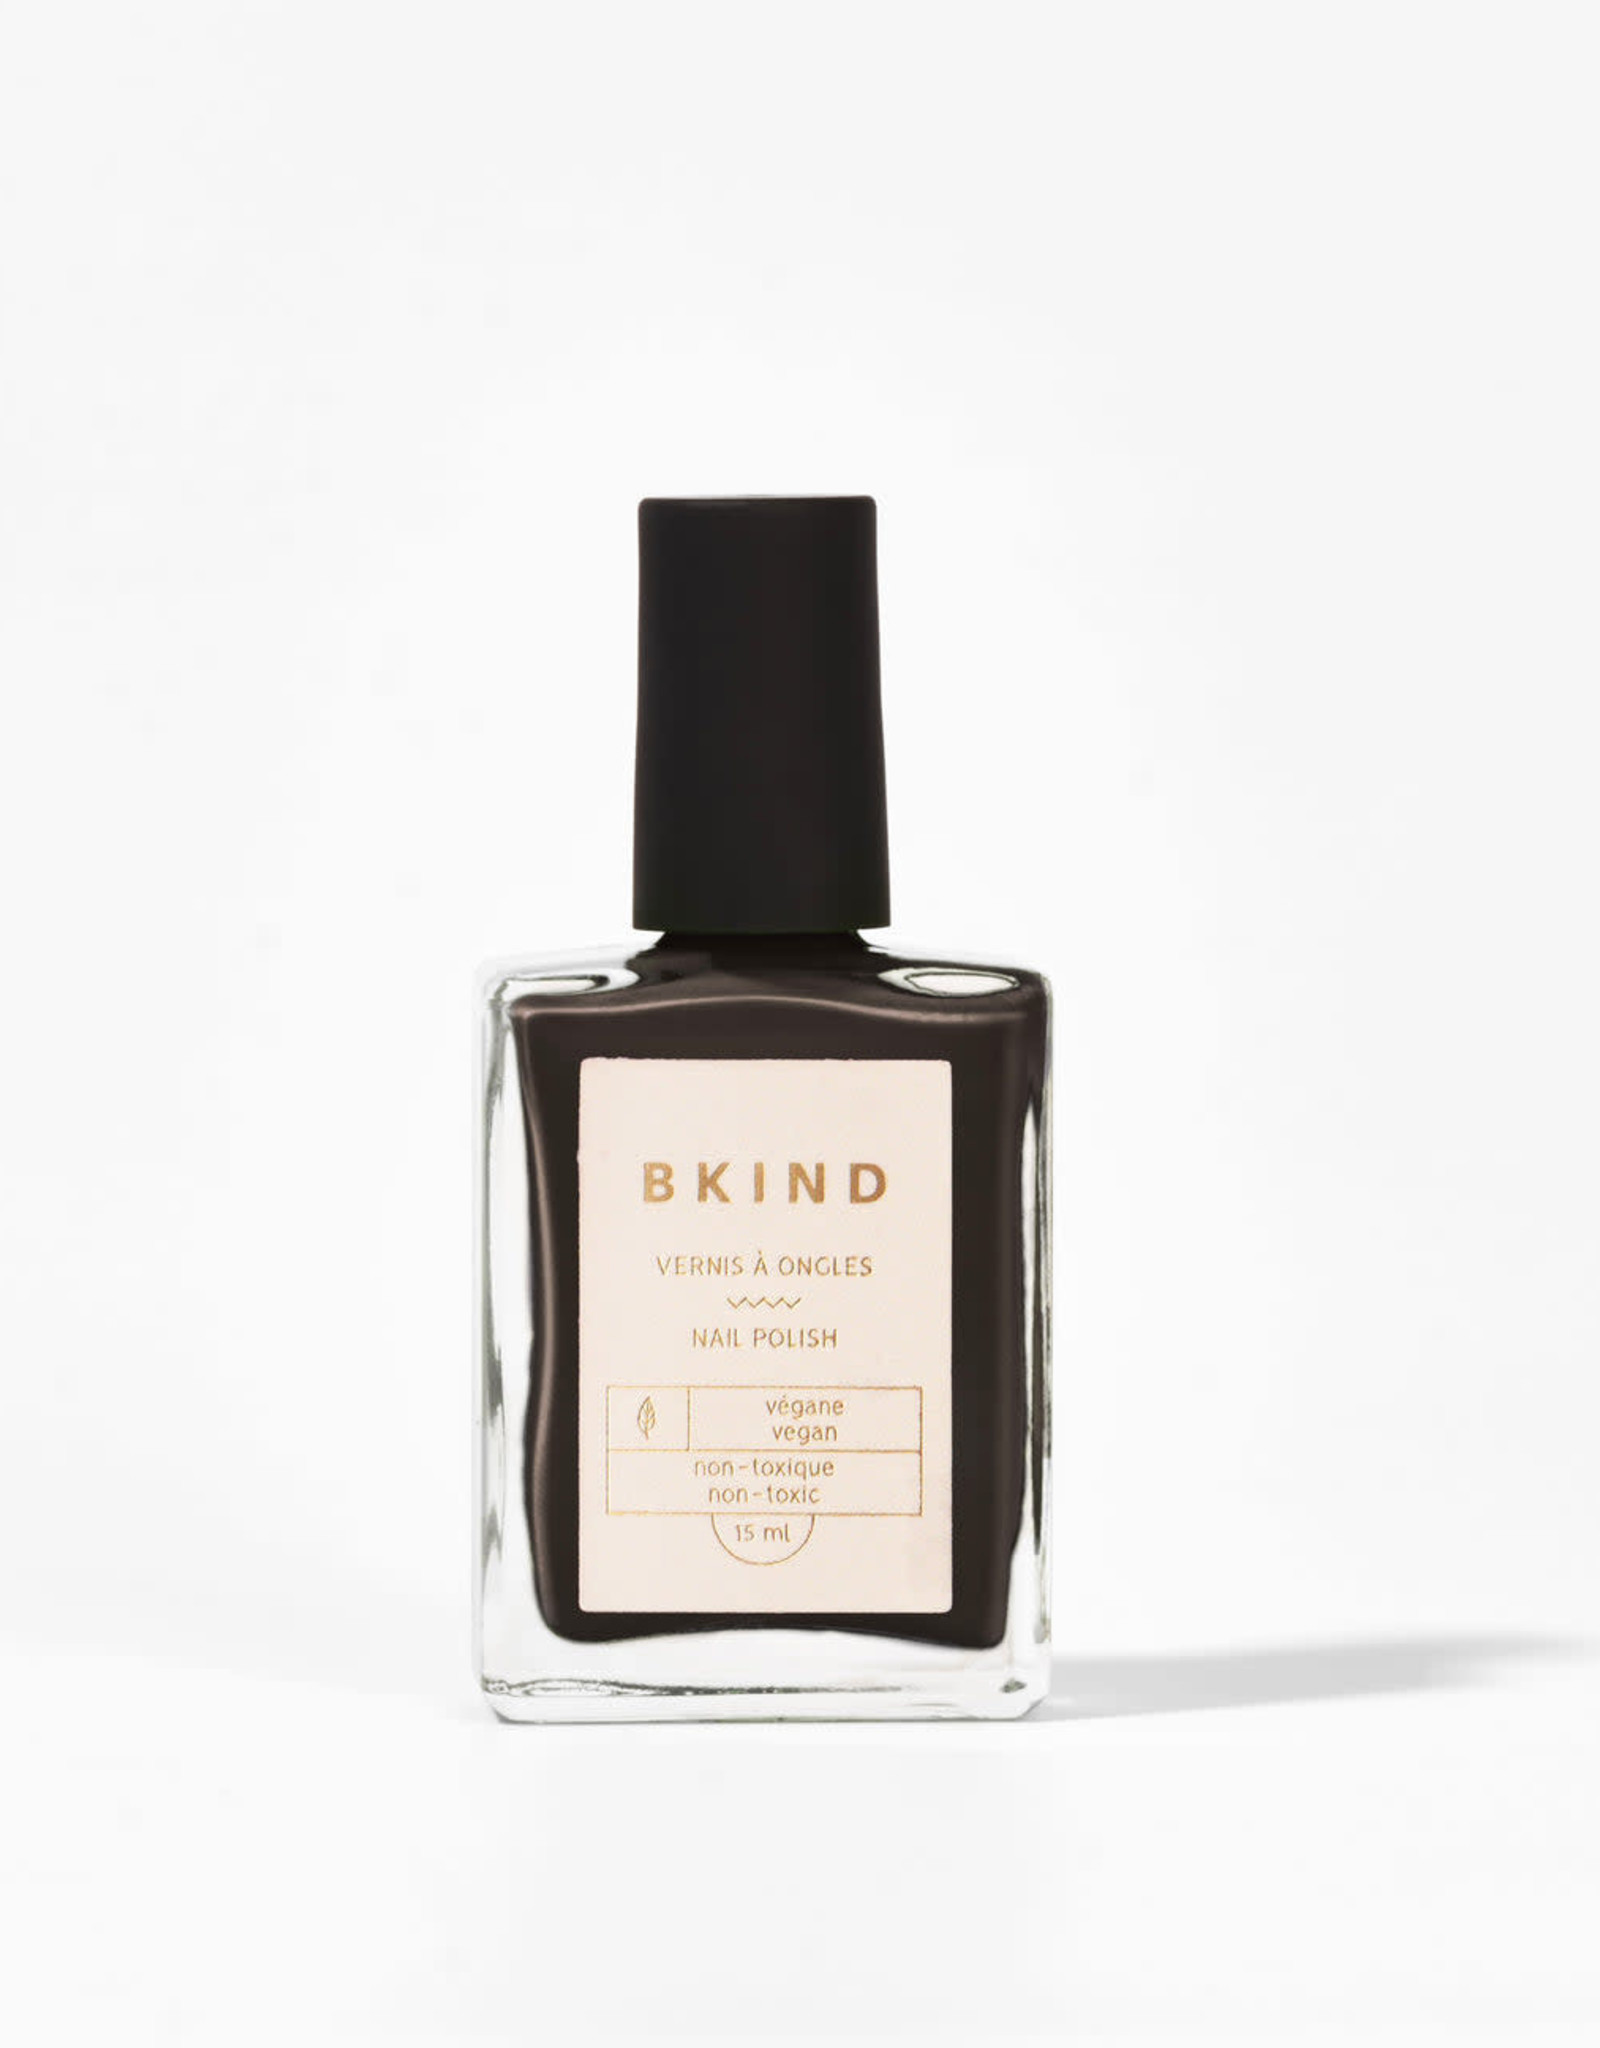 Bkind Vernis à ongle collection automne